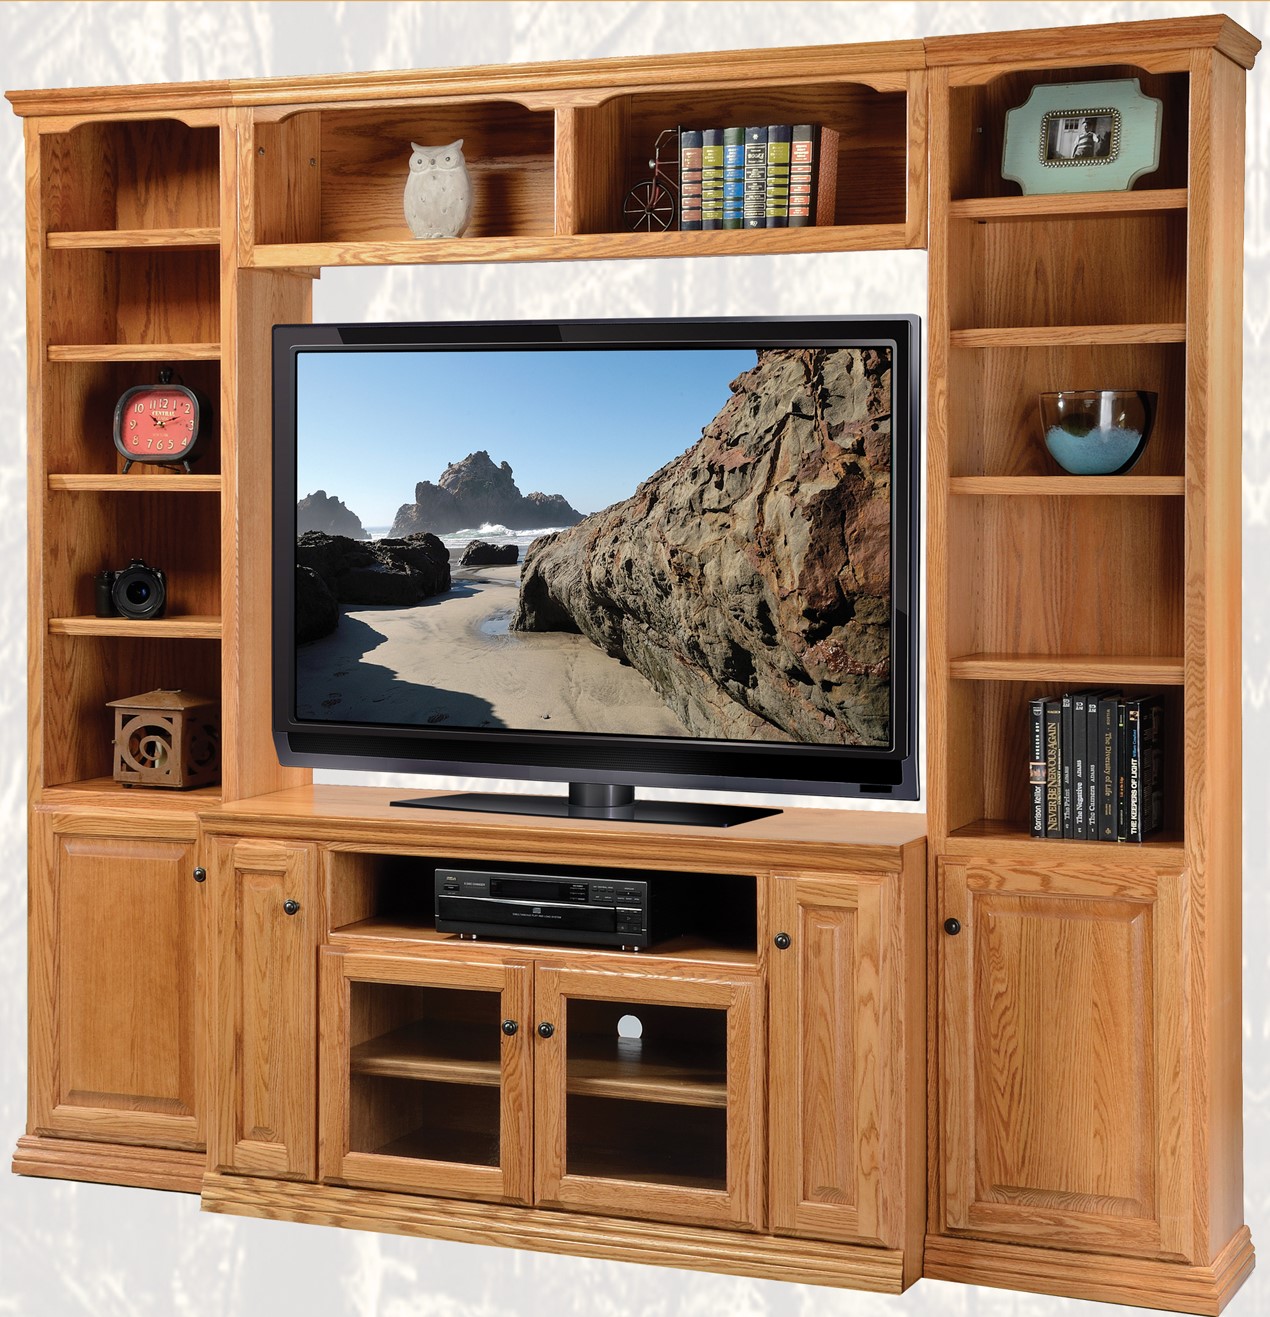 Tv Stand with Fireplace Costco Best Of Whi Center Diego Antique Corner Basement Farmhouse